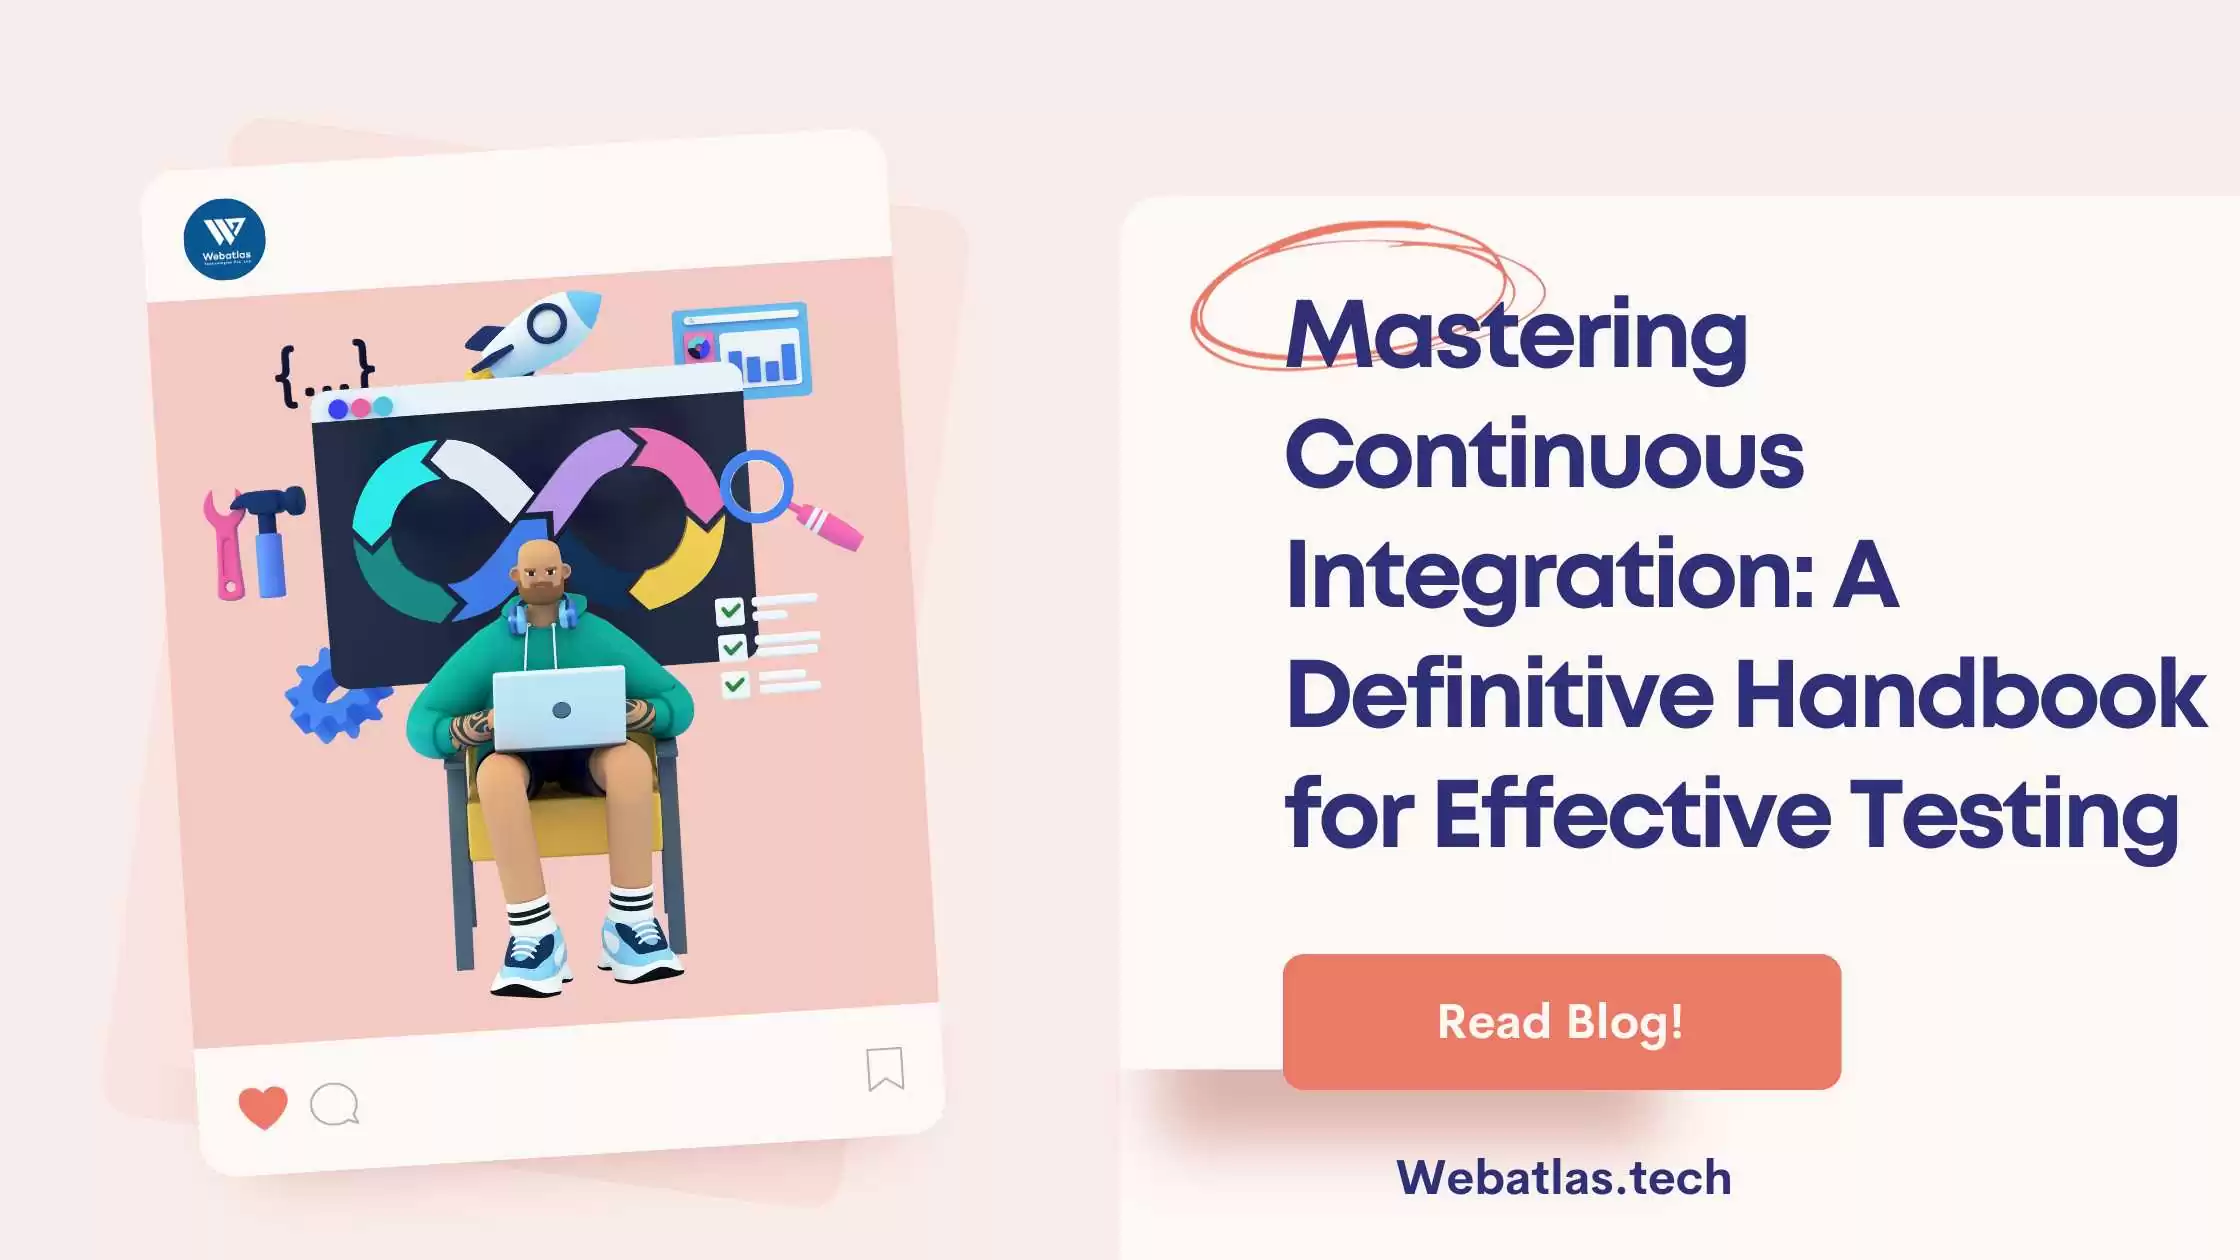 Implementing Continuous Integration for Effective Testing